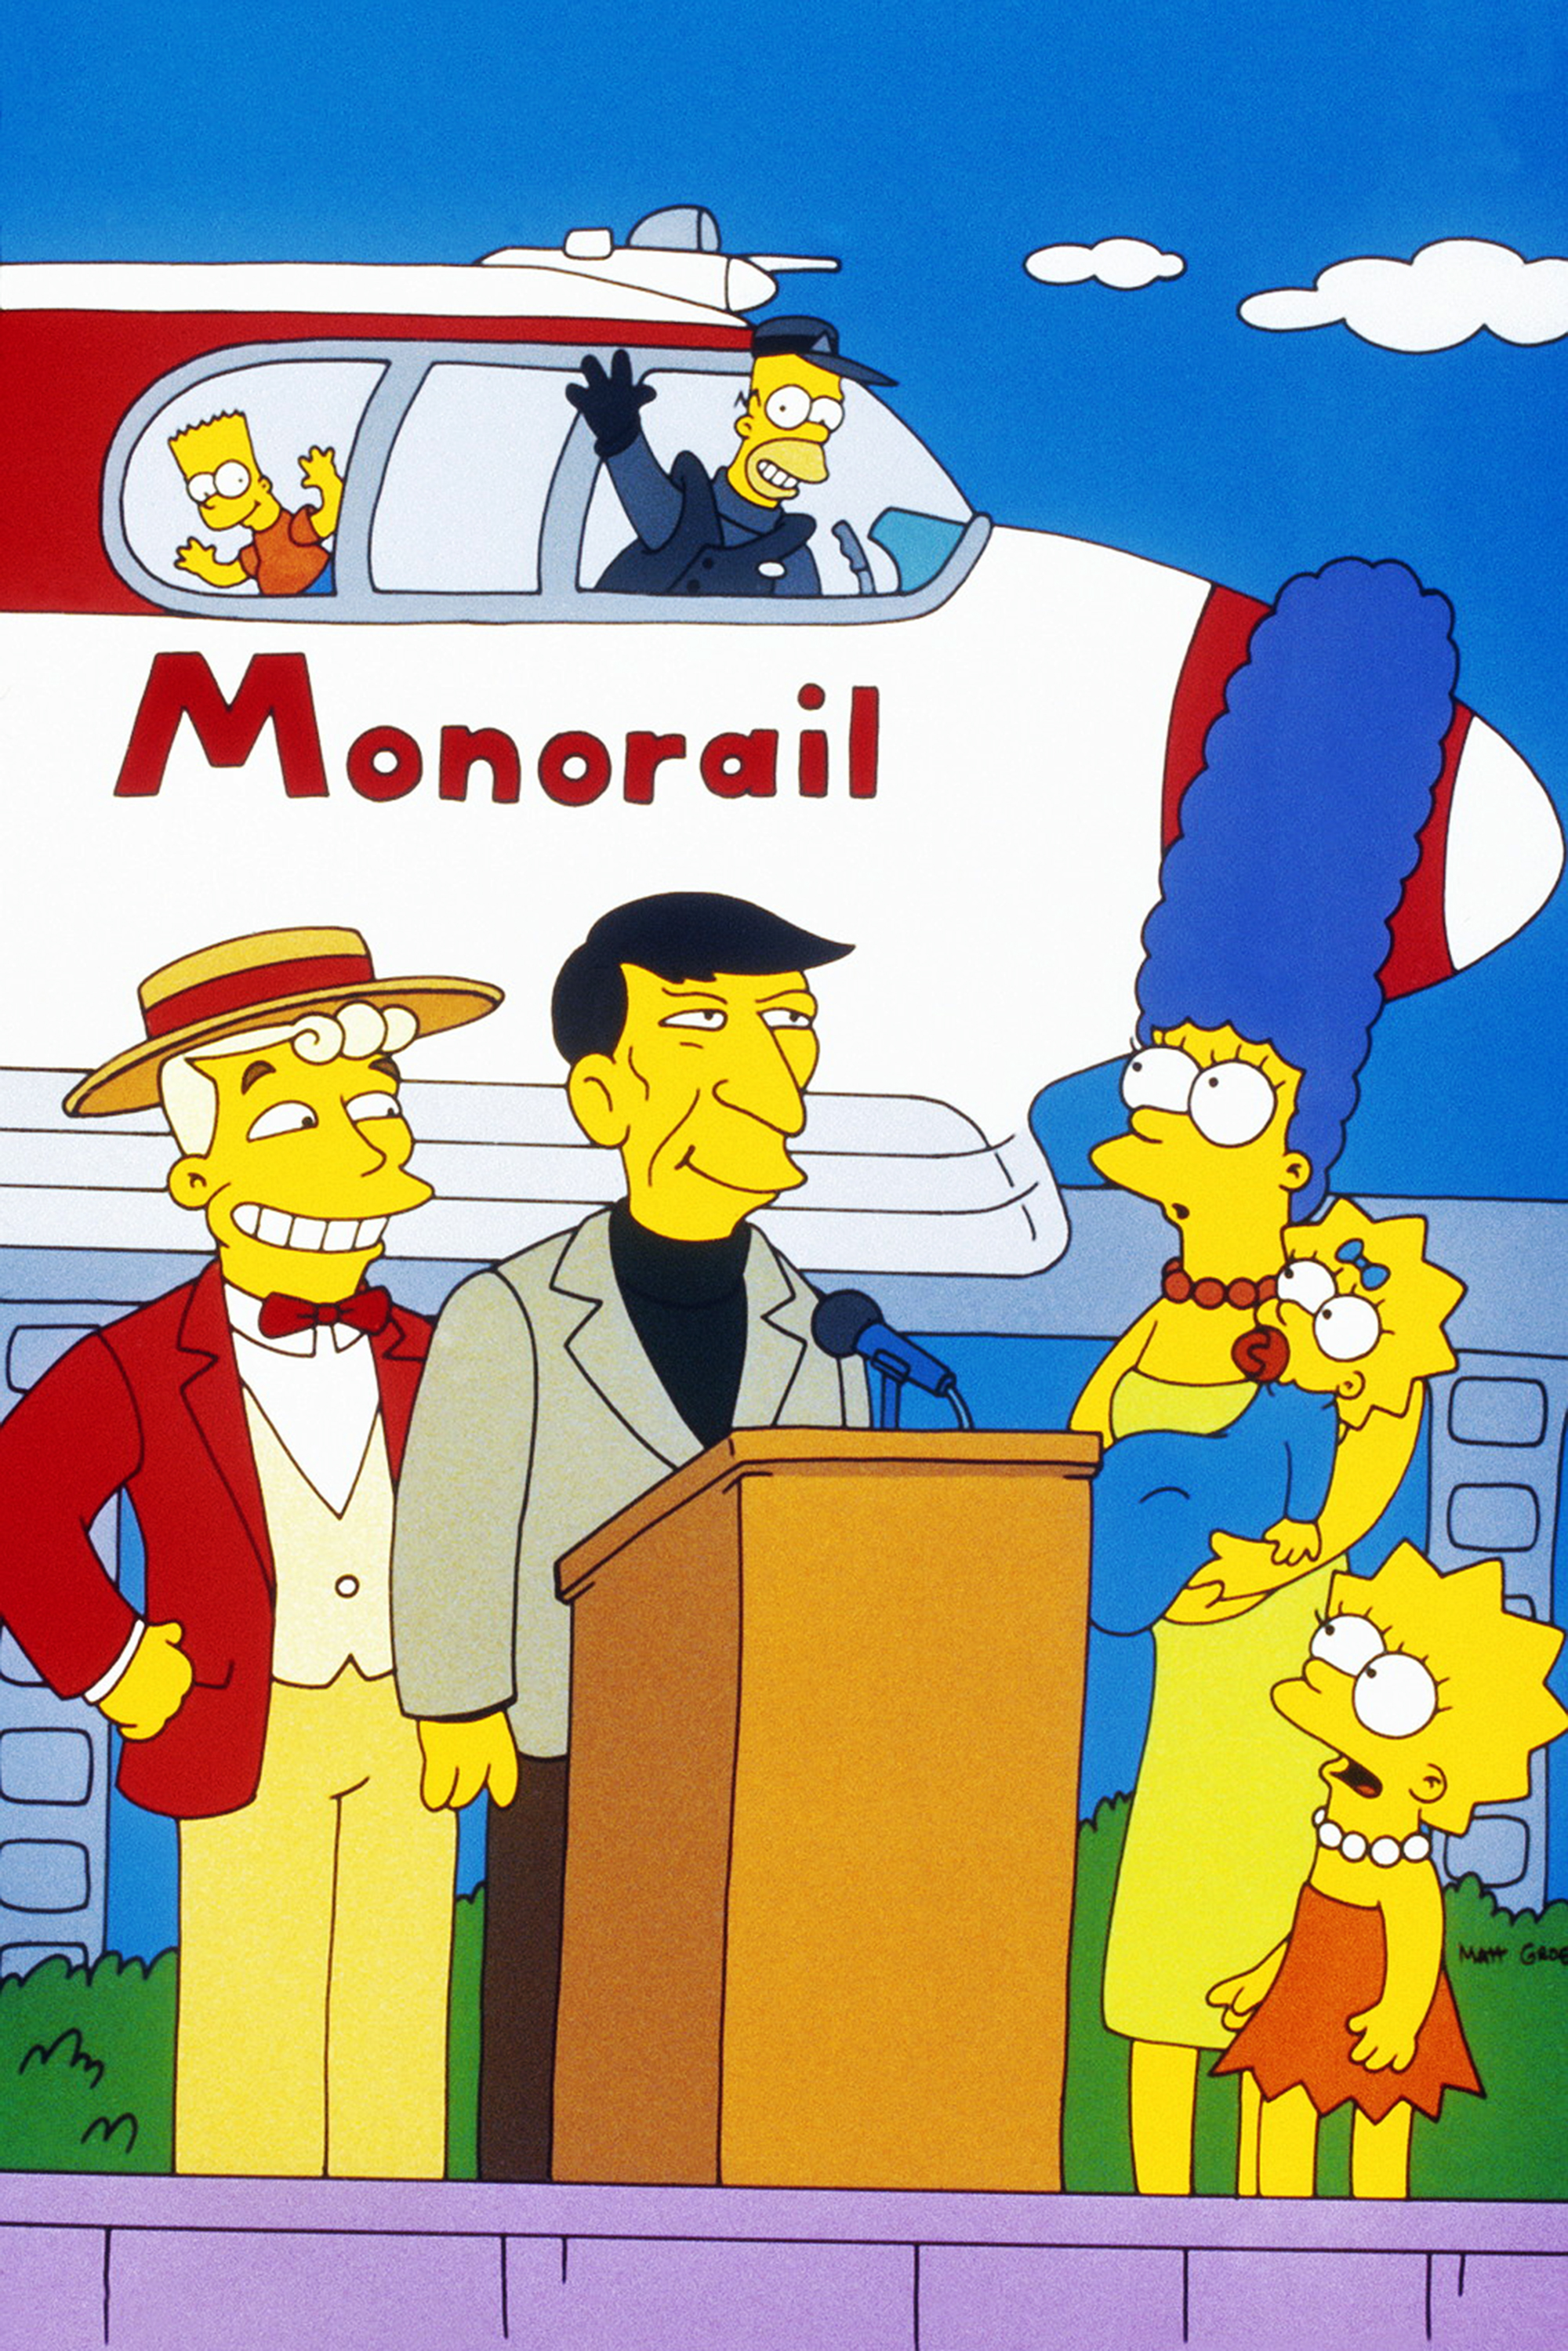 Leonard Nimoy: Leonard Nimoy made his first cameo as himself in the classic episode "Marge vs. the Monorail” in 1993. Nimoy comes to Springfield as a guest of honor for the maiden voyage of the town's fraudulent monorail. Nimoy also appeared in “The Springfield Files” in 1997 as himself. The 2015 episode “The Princess Guide” was dedicated to his memory.